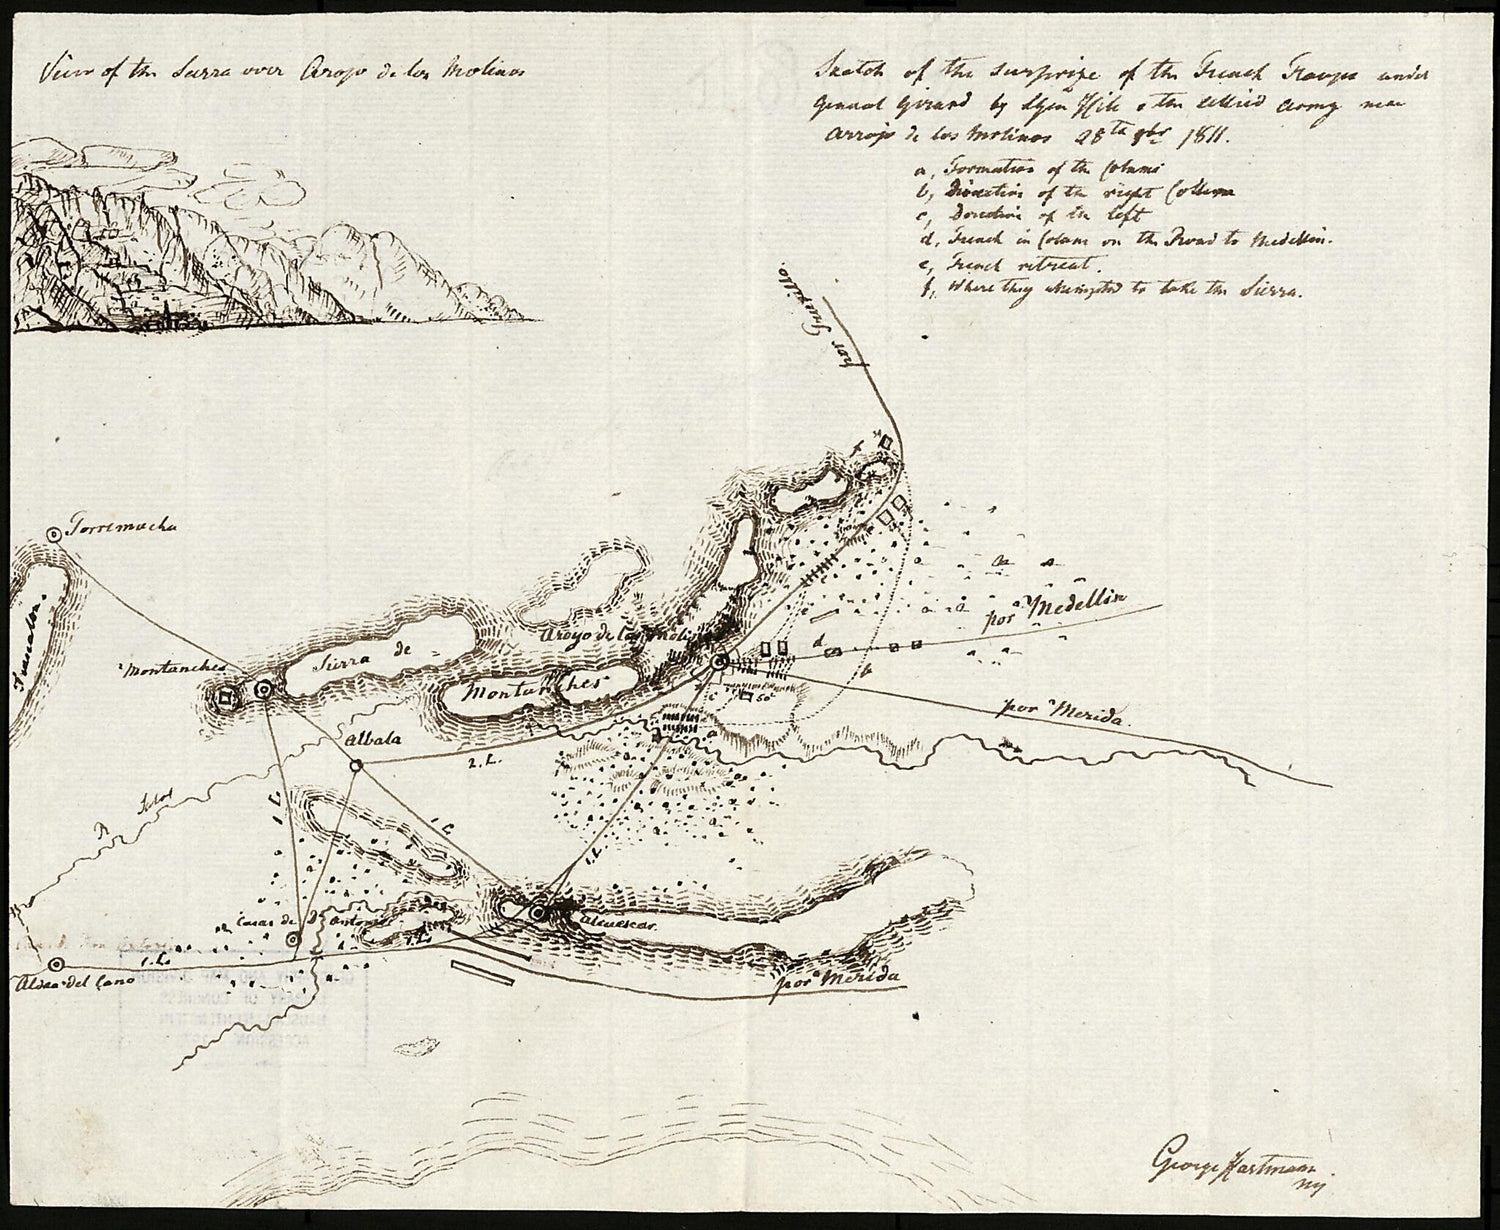 This old map of Sketch of the Surprise of the French Troups Under General Girard by Lt. Gen. Hill of the Allied Army Near Arrojo De Los Molinos, 28th Obr. from 1811 was created by Georg Julius Von Hartmann in 1811